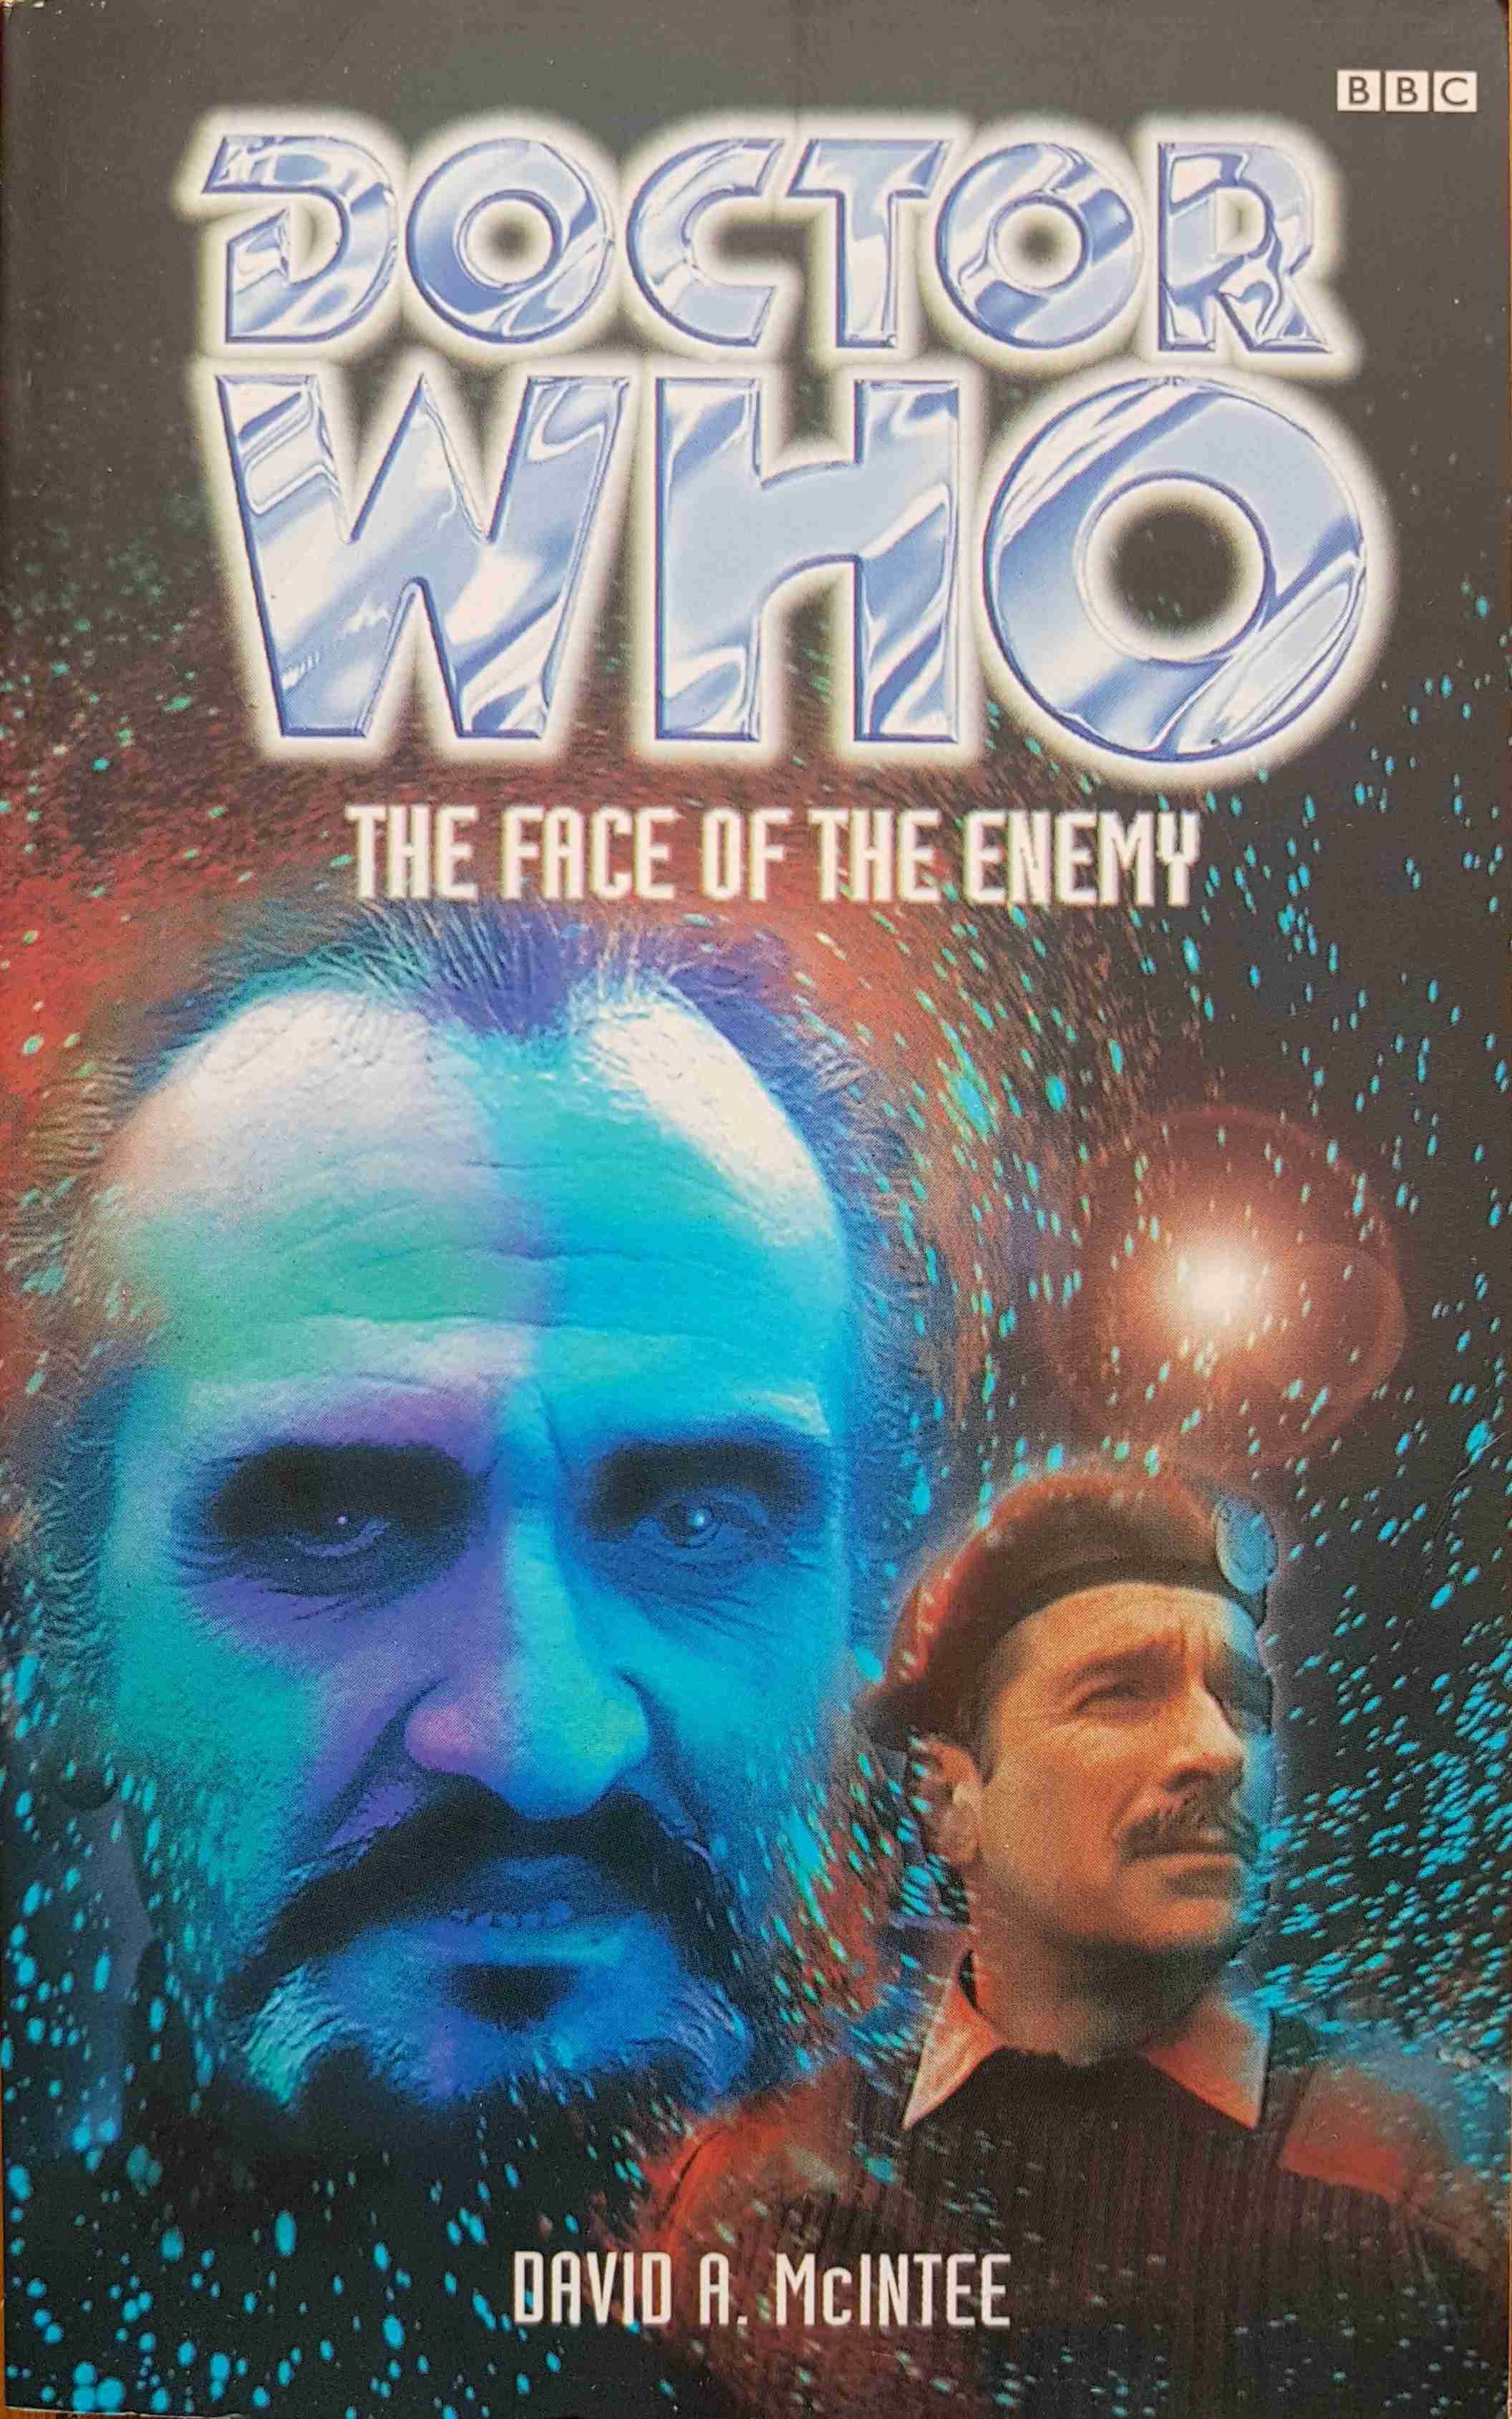 Picture of 0-563-40580-5 Doctor Who - The face of the enemy by artist David A. McIntee from the BBC records and Tapes library